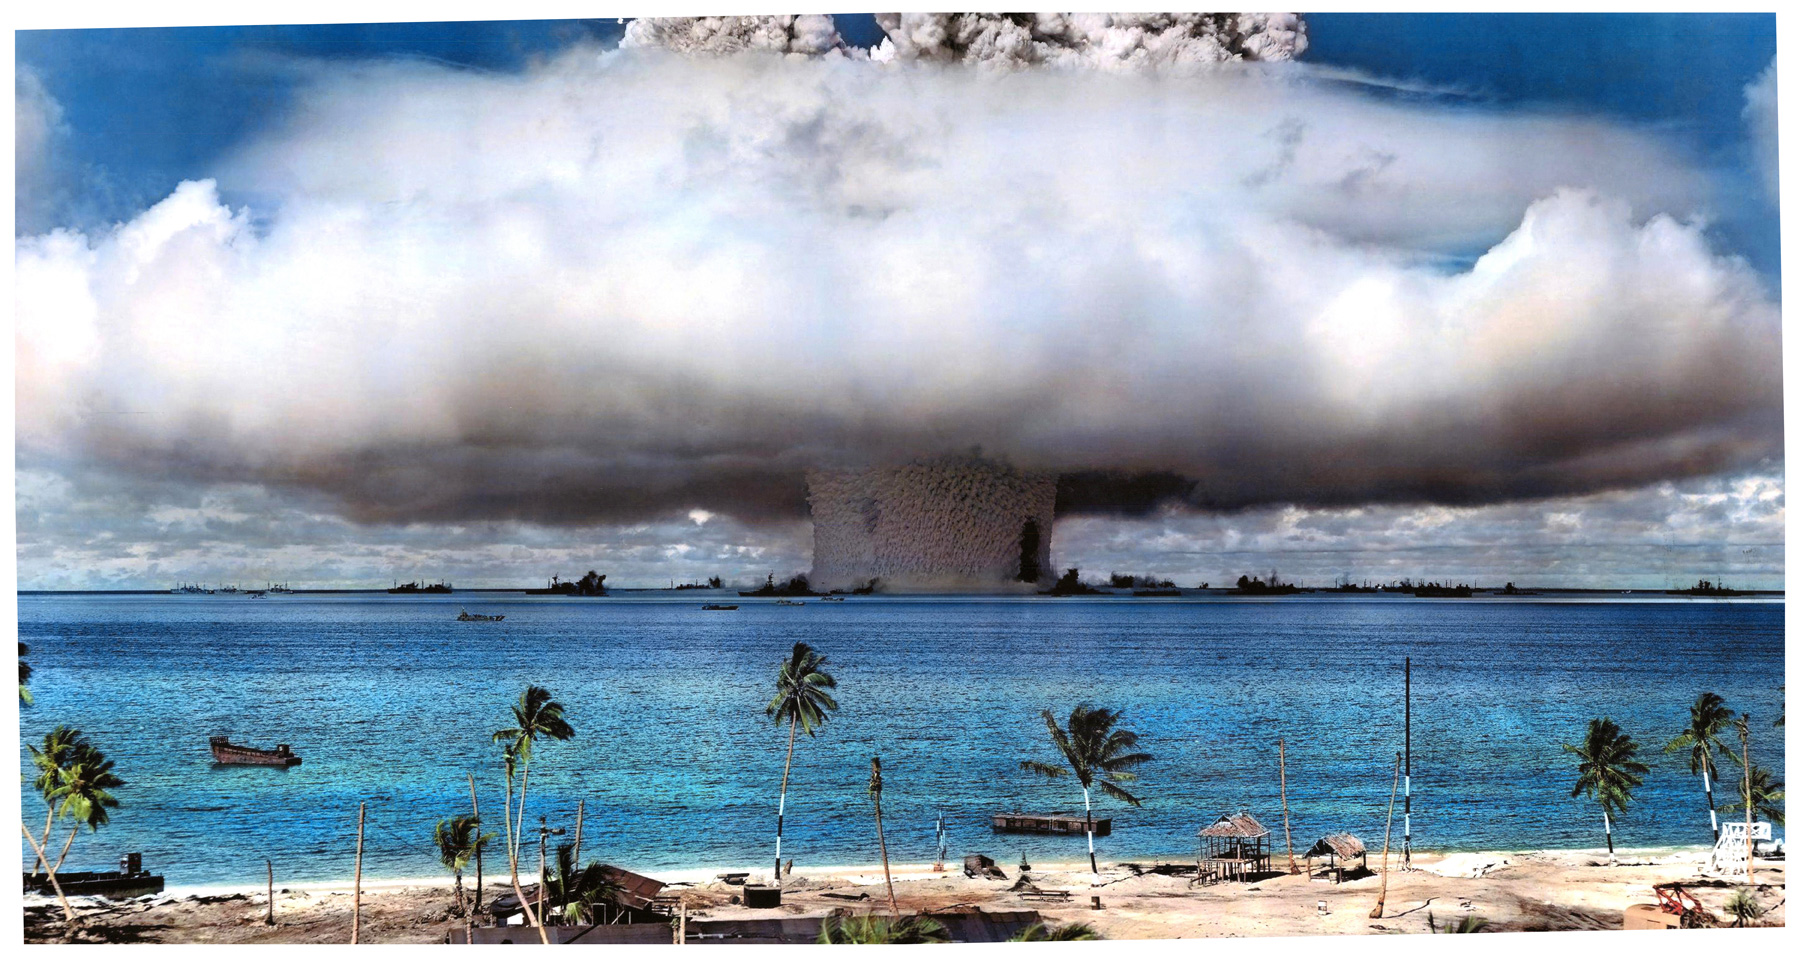 Dizziness merger of Tropic Fallout: a look back at the Bikini nuclear tests, 70 years later |  Ars Technica